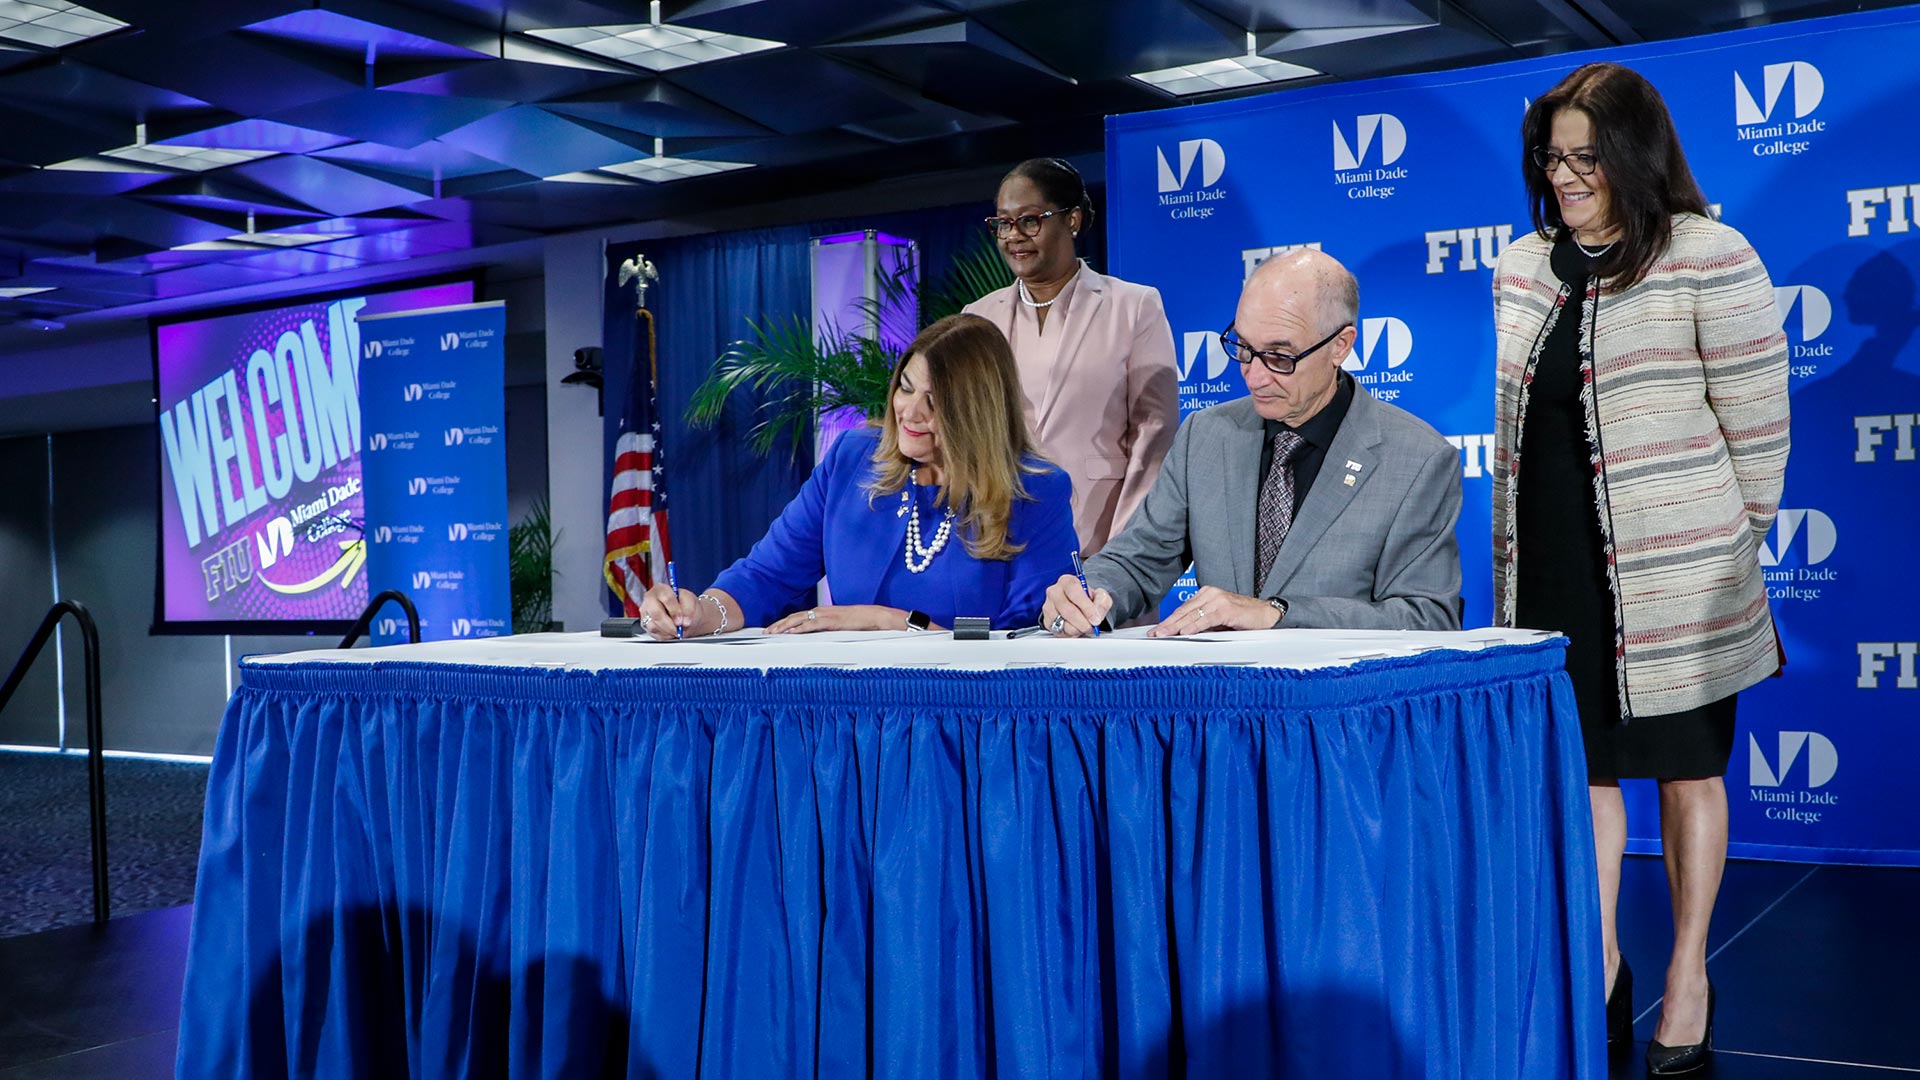 MDC and FIU officials signing agreement